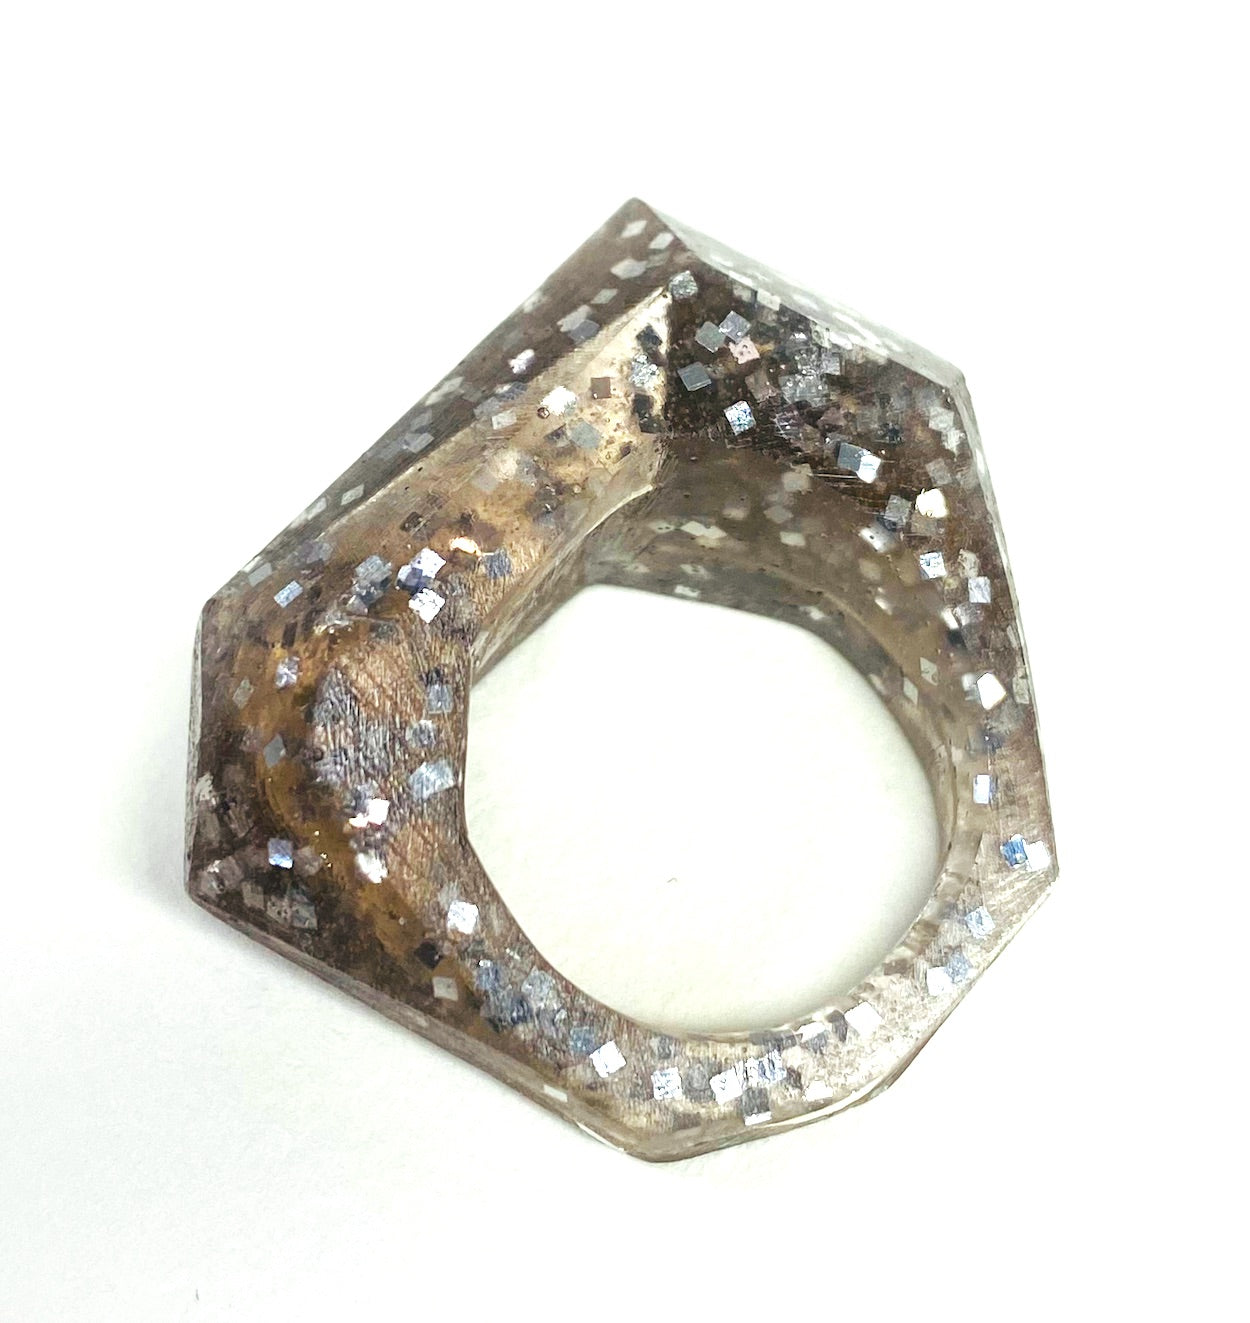 Inner Link Ring, Smokey Glitter and Silver